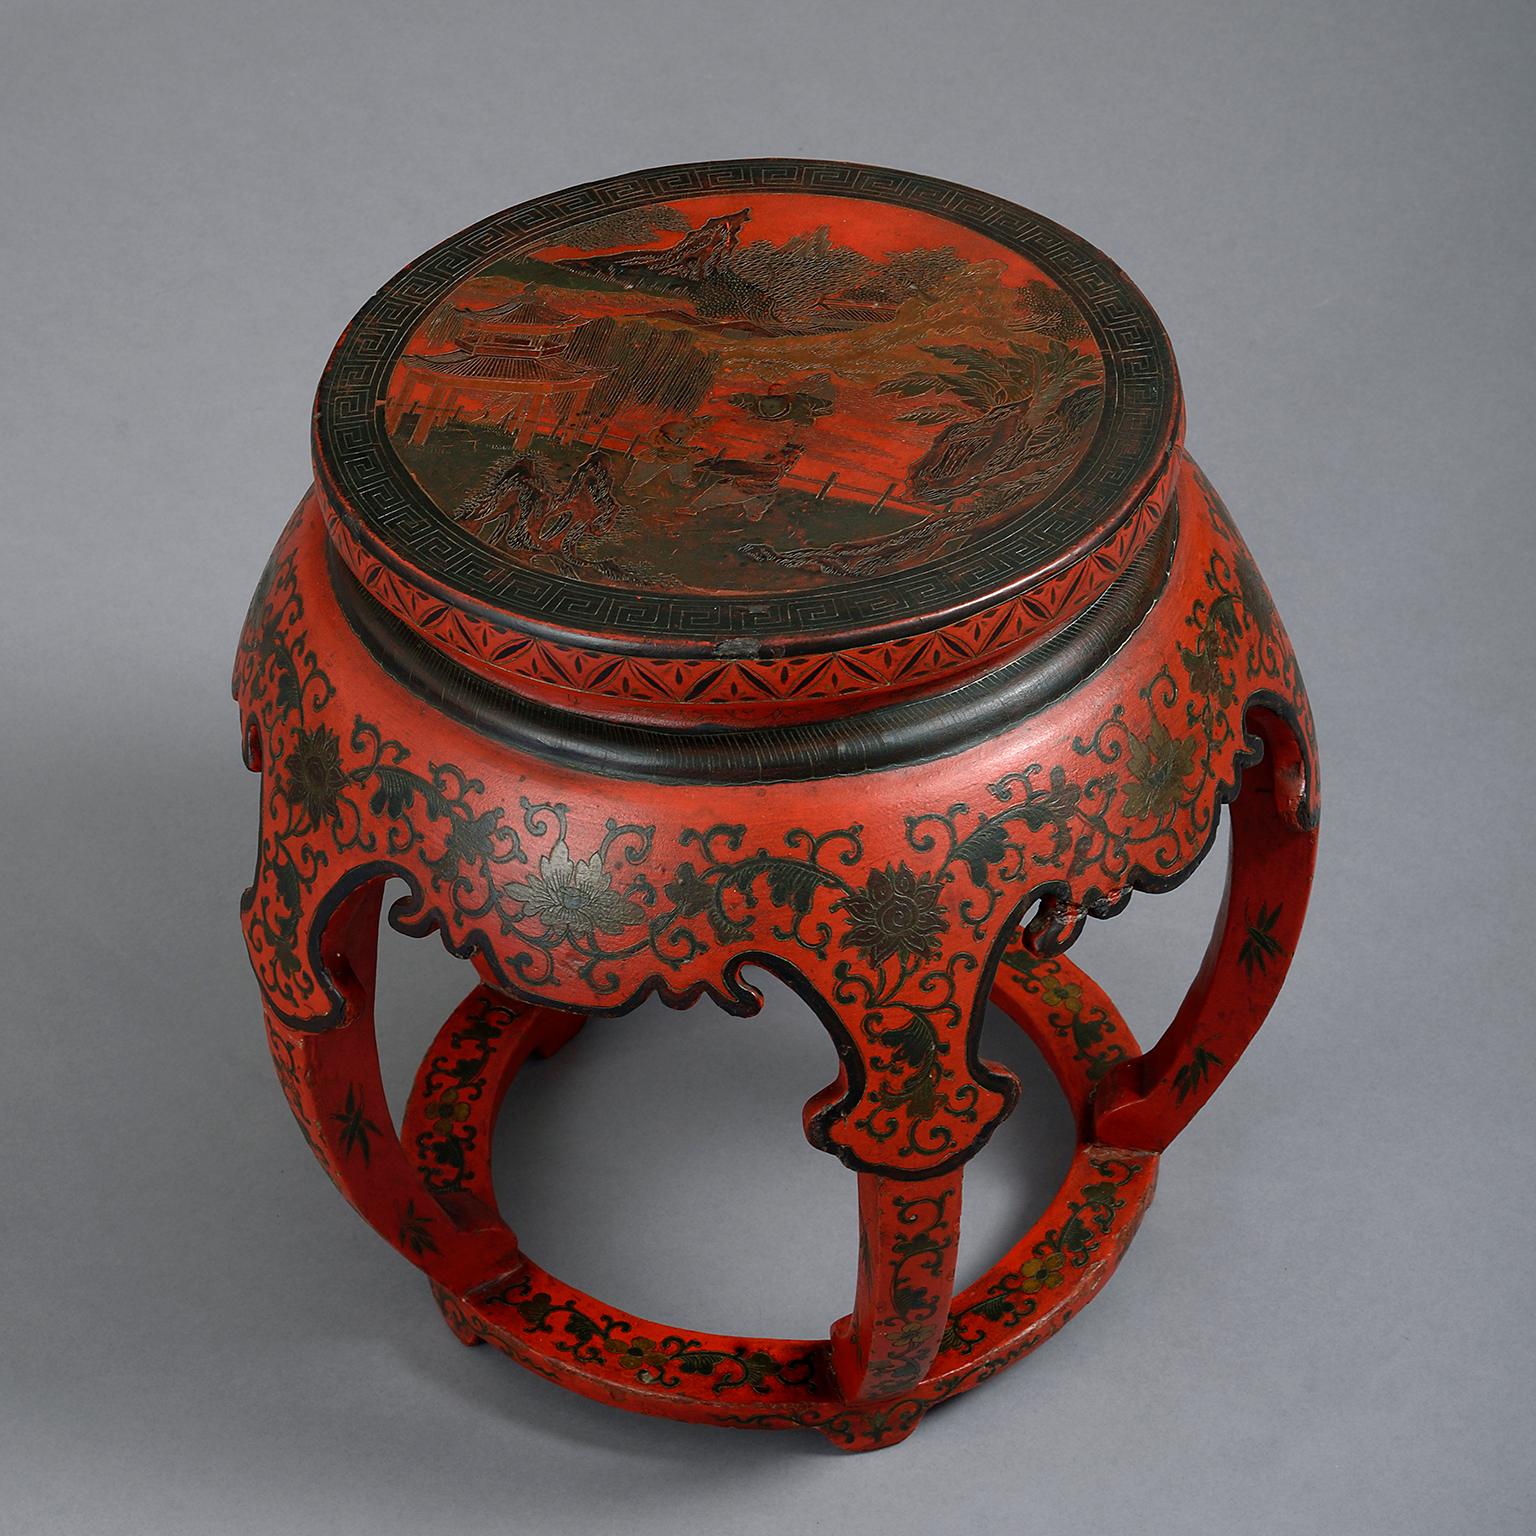 Chinese Export Early 20th Century Chinese Red Lacquer Low Table or Stool